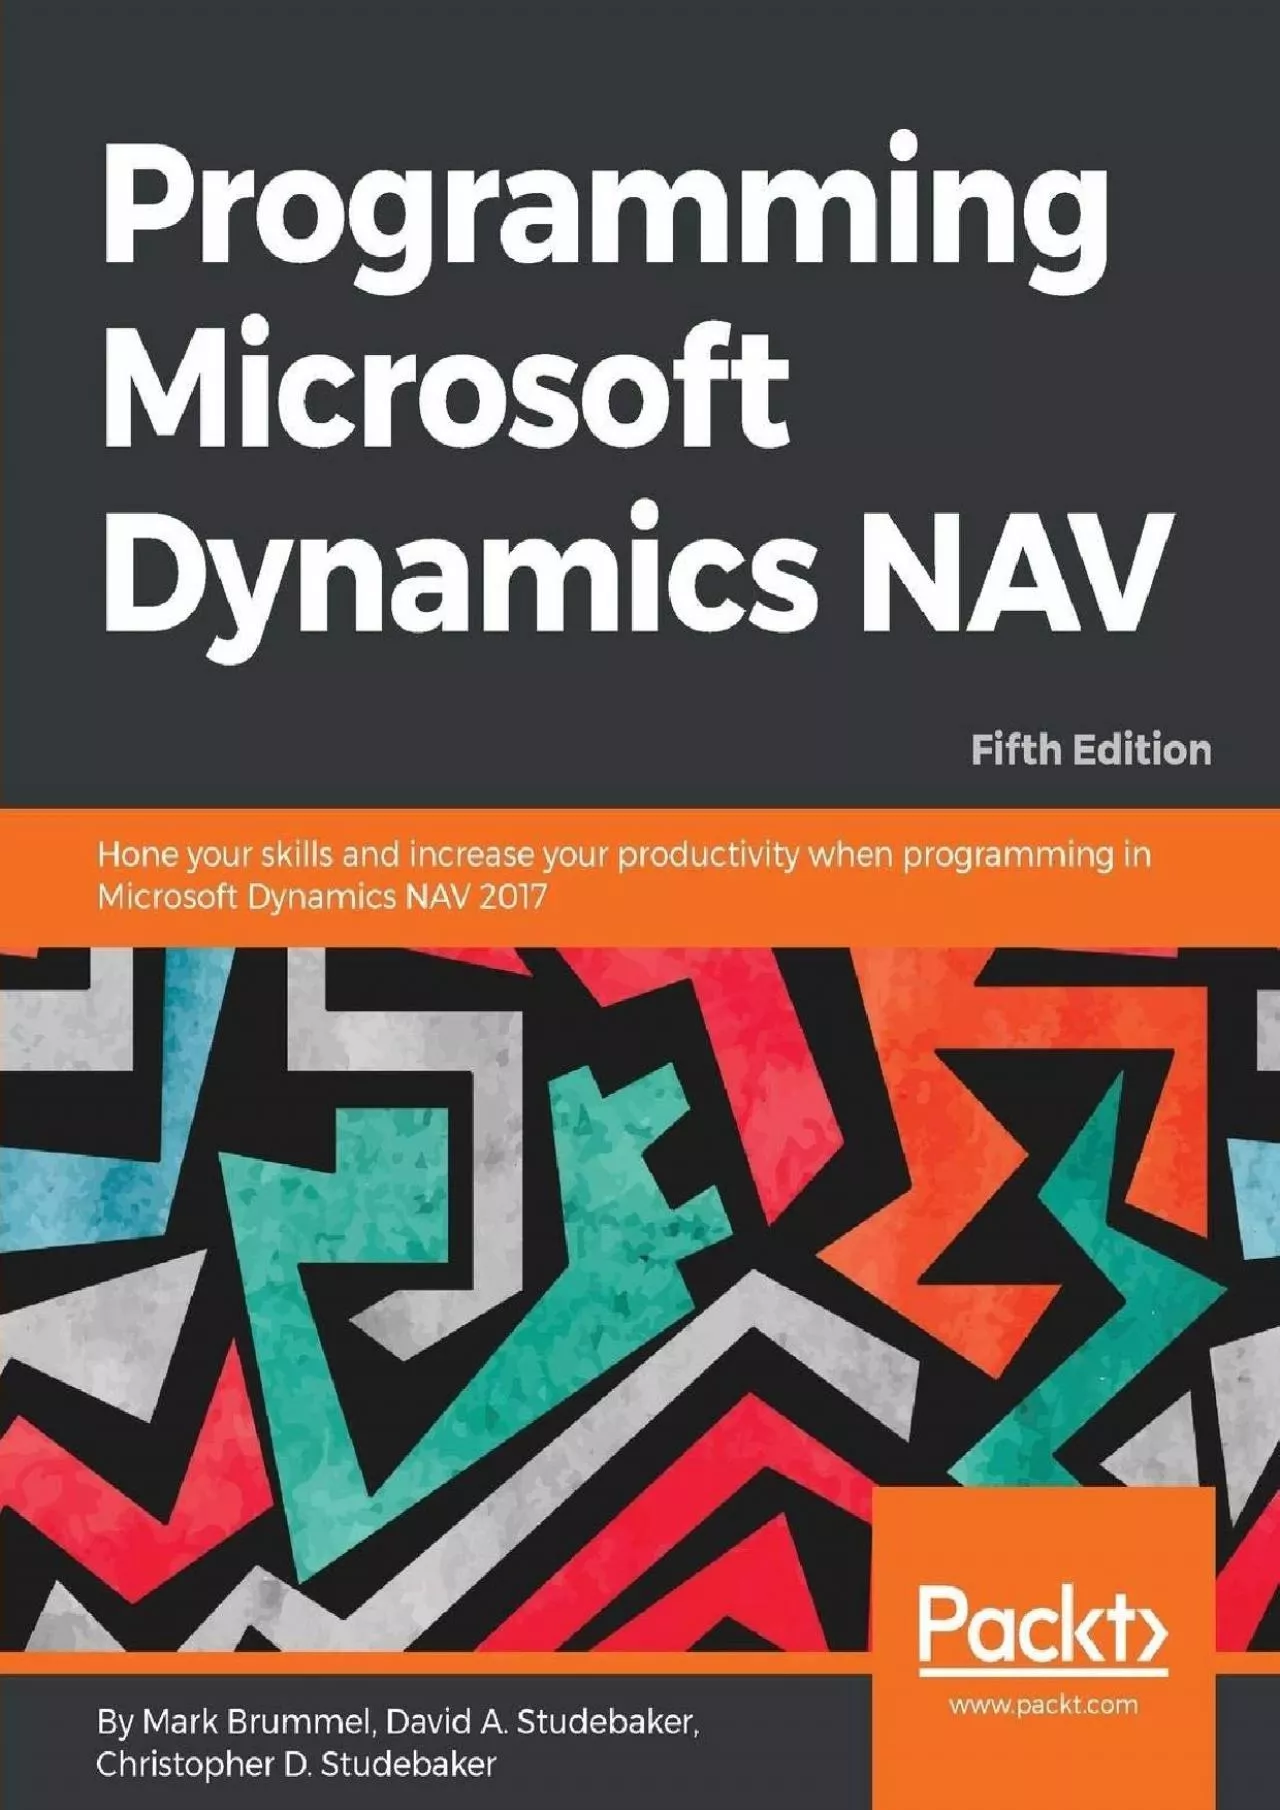 Programming Microsoft Dynamics NAV: Hone your skills and increase your productivity when